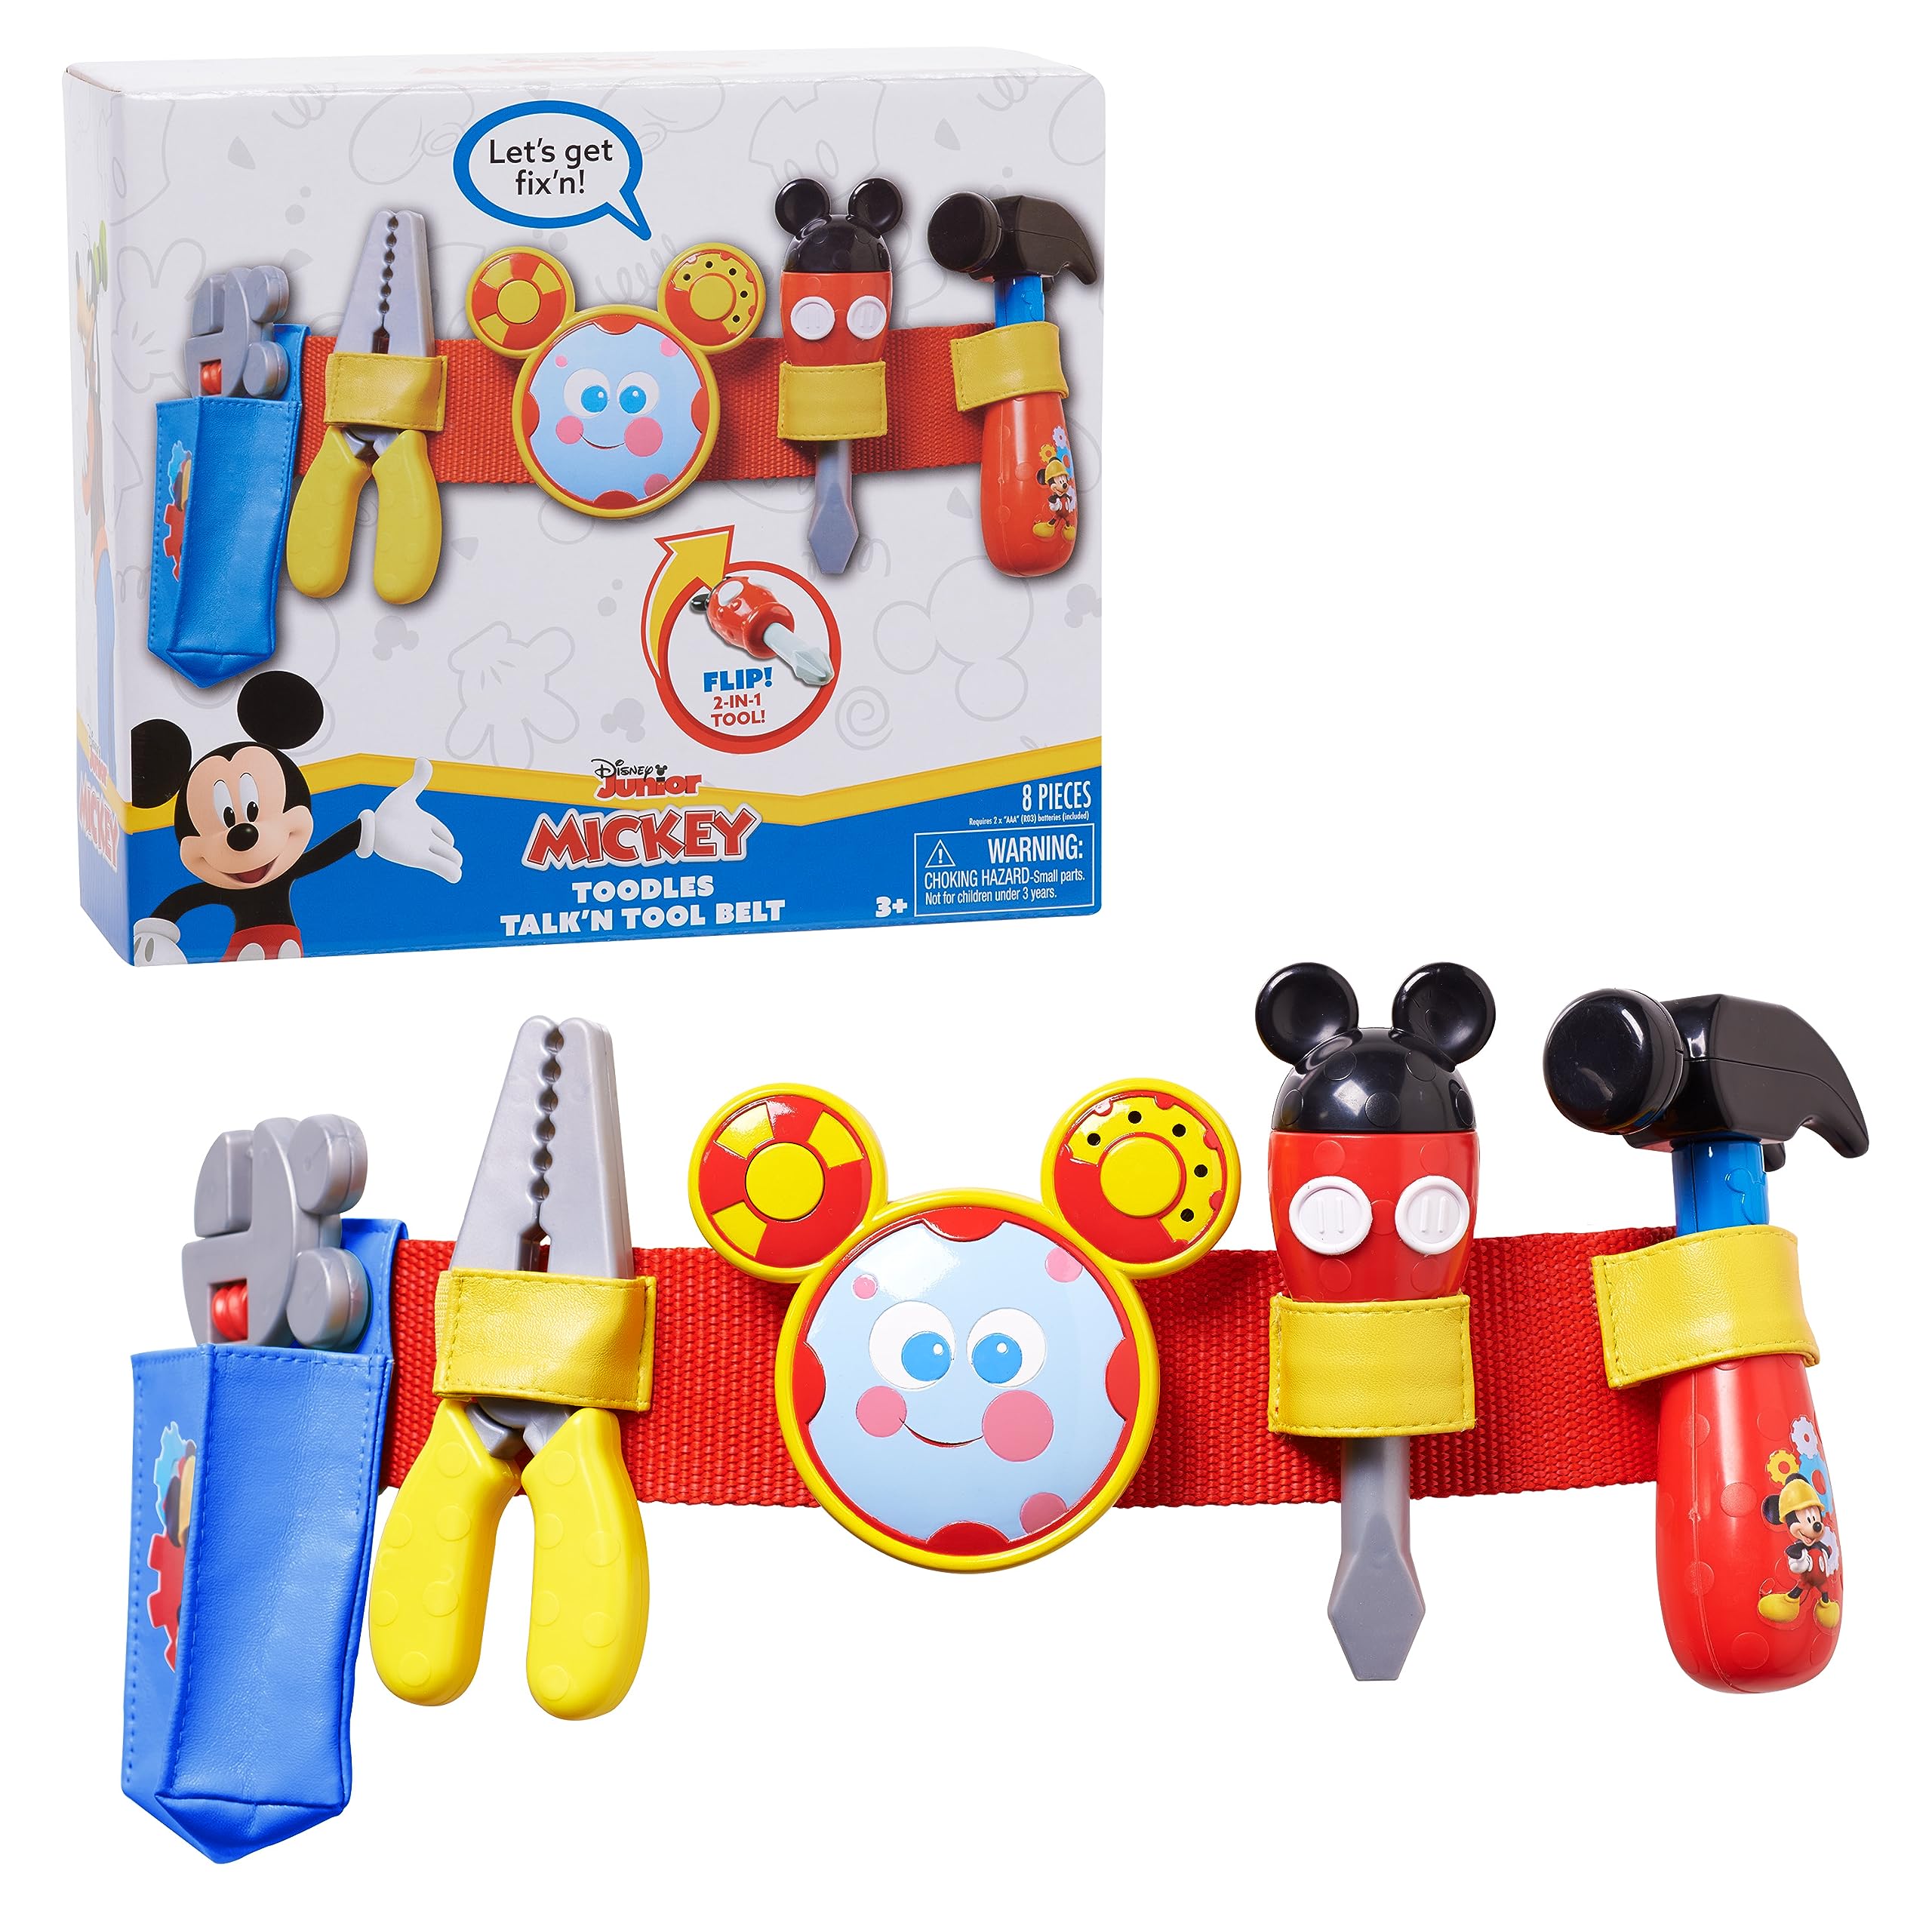 Just Play Disney Mickey Toodles Talk'n Toolbelt and Kids Play Tool Accessories for Contruction and Building Role Play and Dress Up